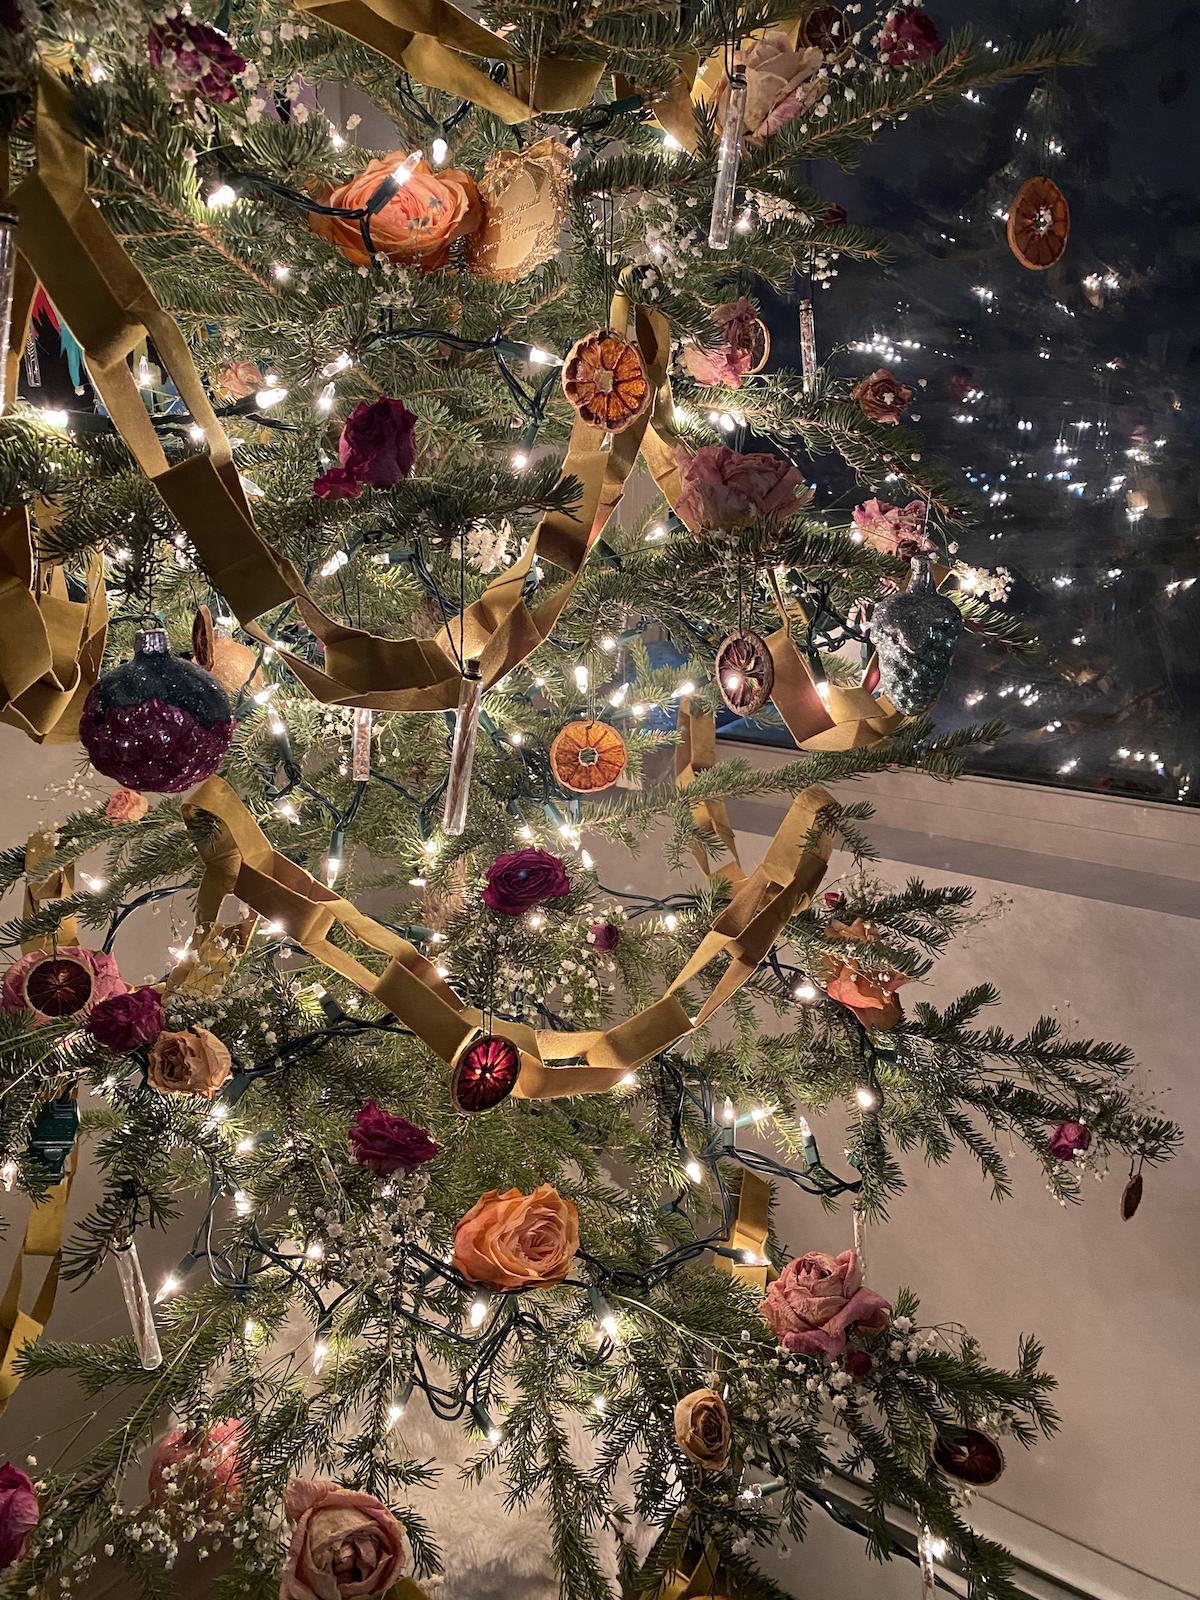 A Christmas tree with the velvet chain link garland, dried flowers and dried fruit